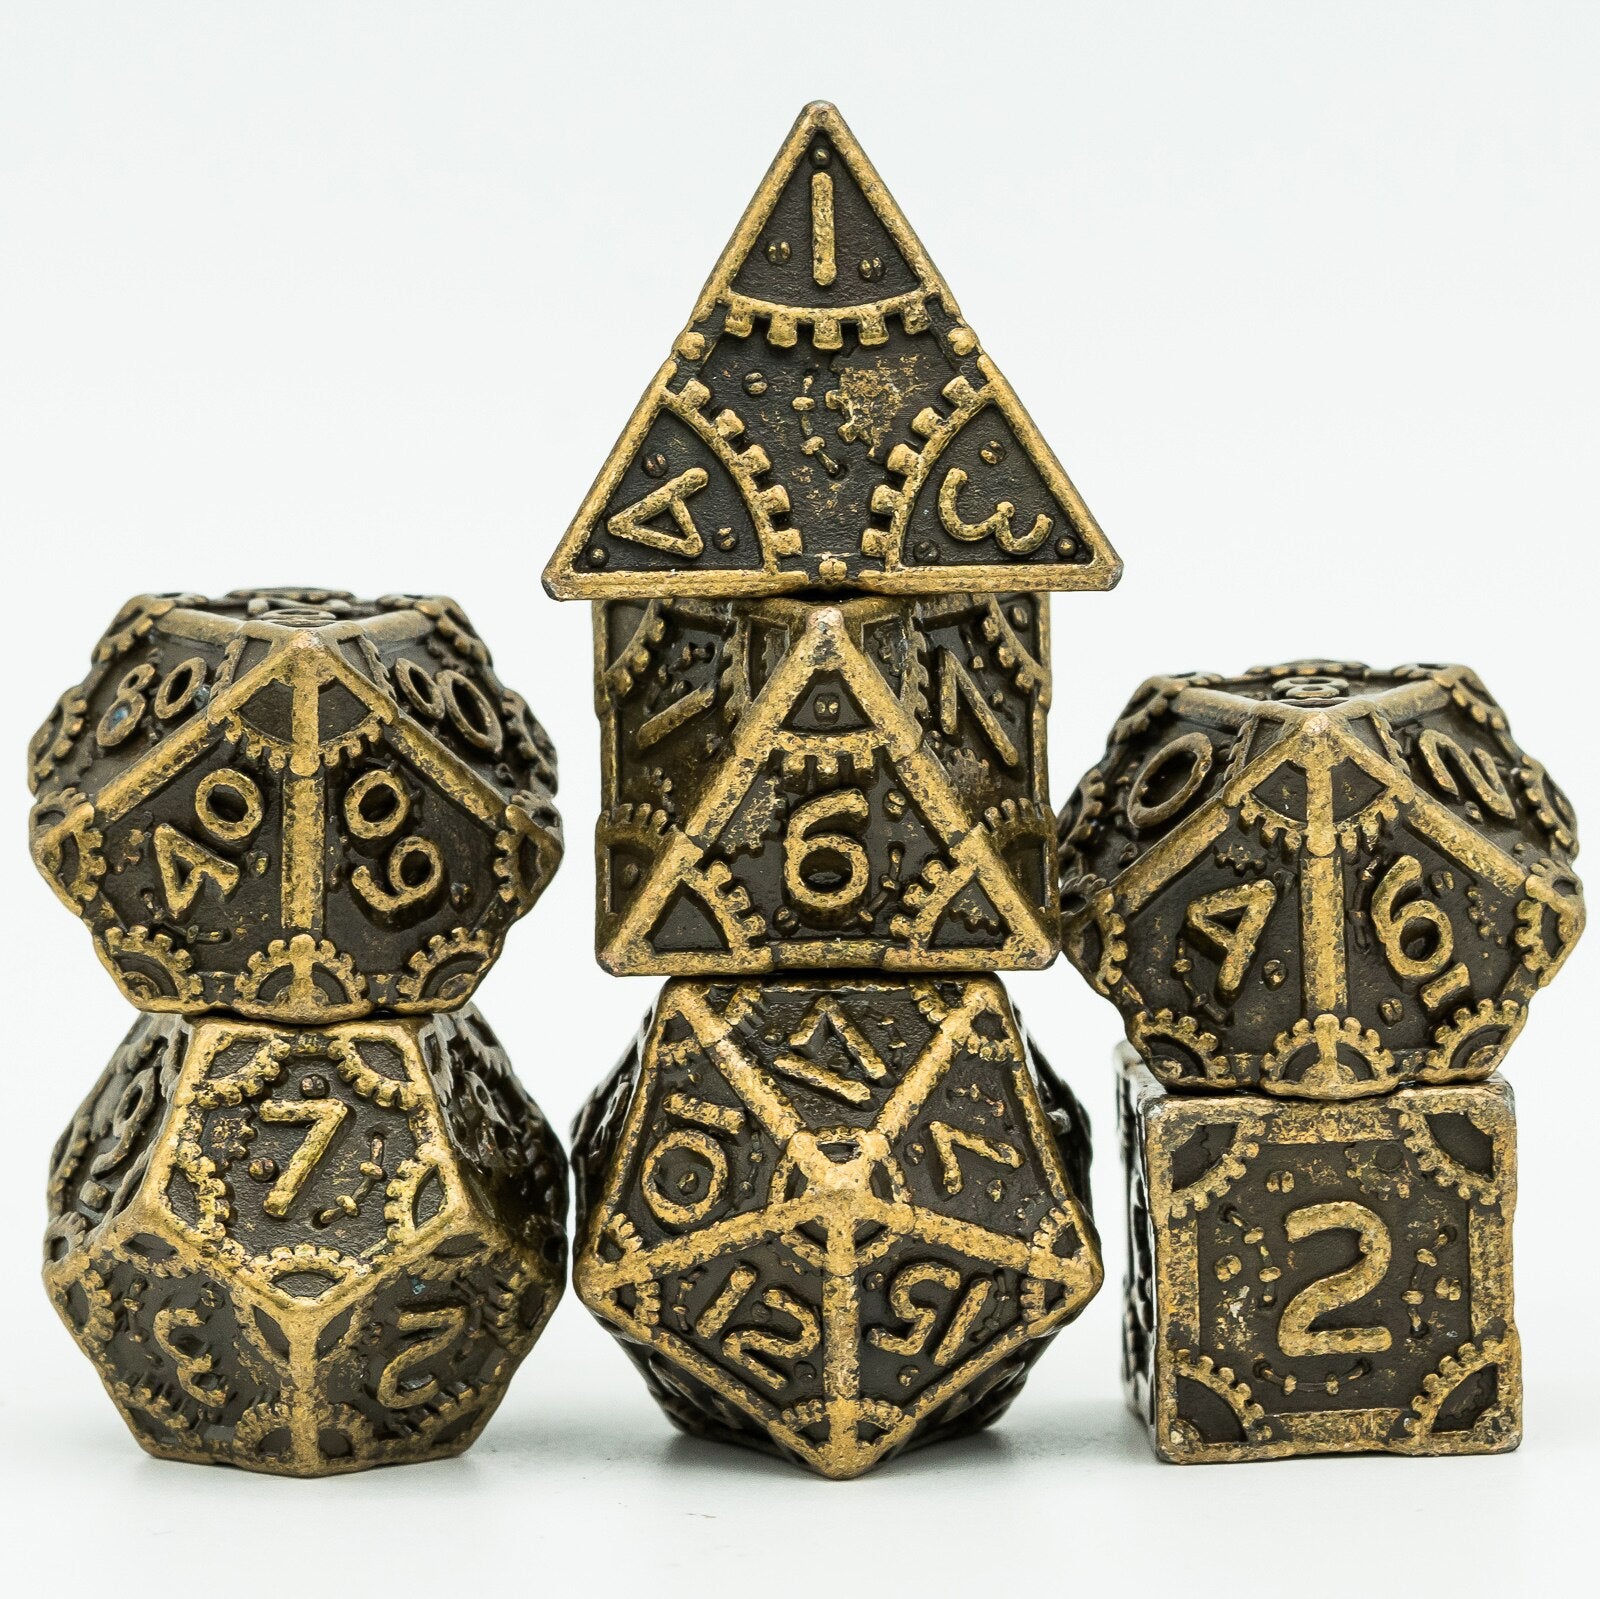 Gold steampunk dice set for TTRPGs